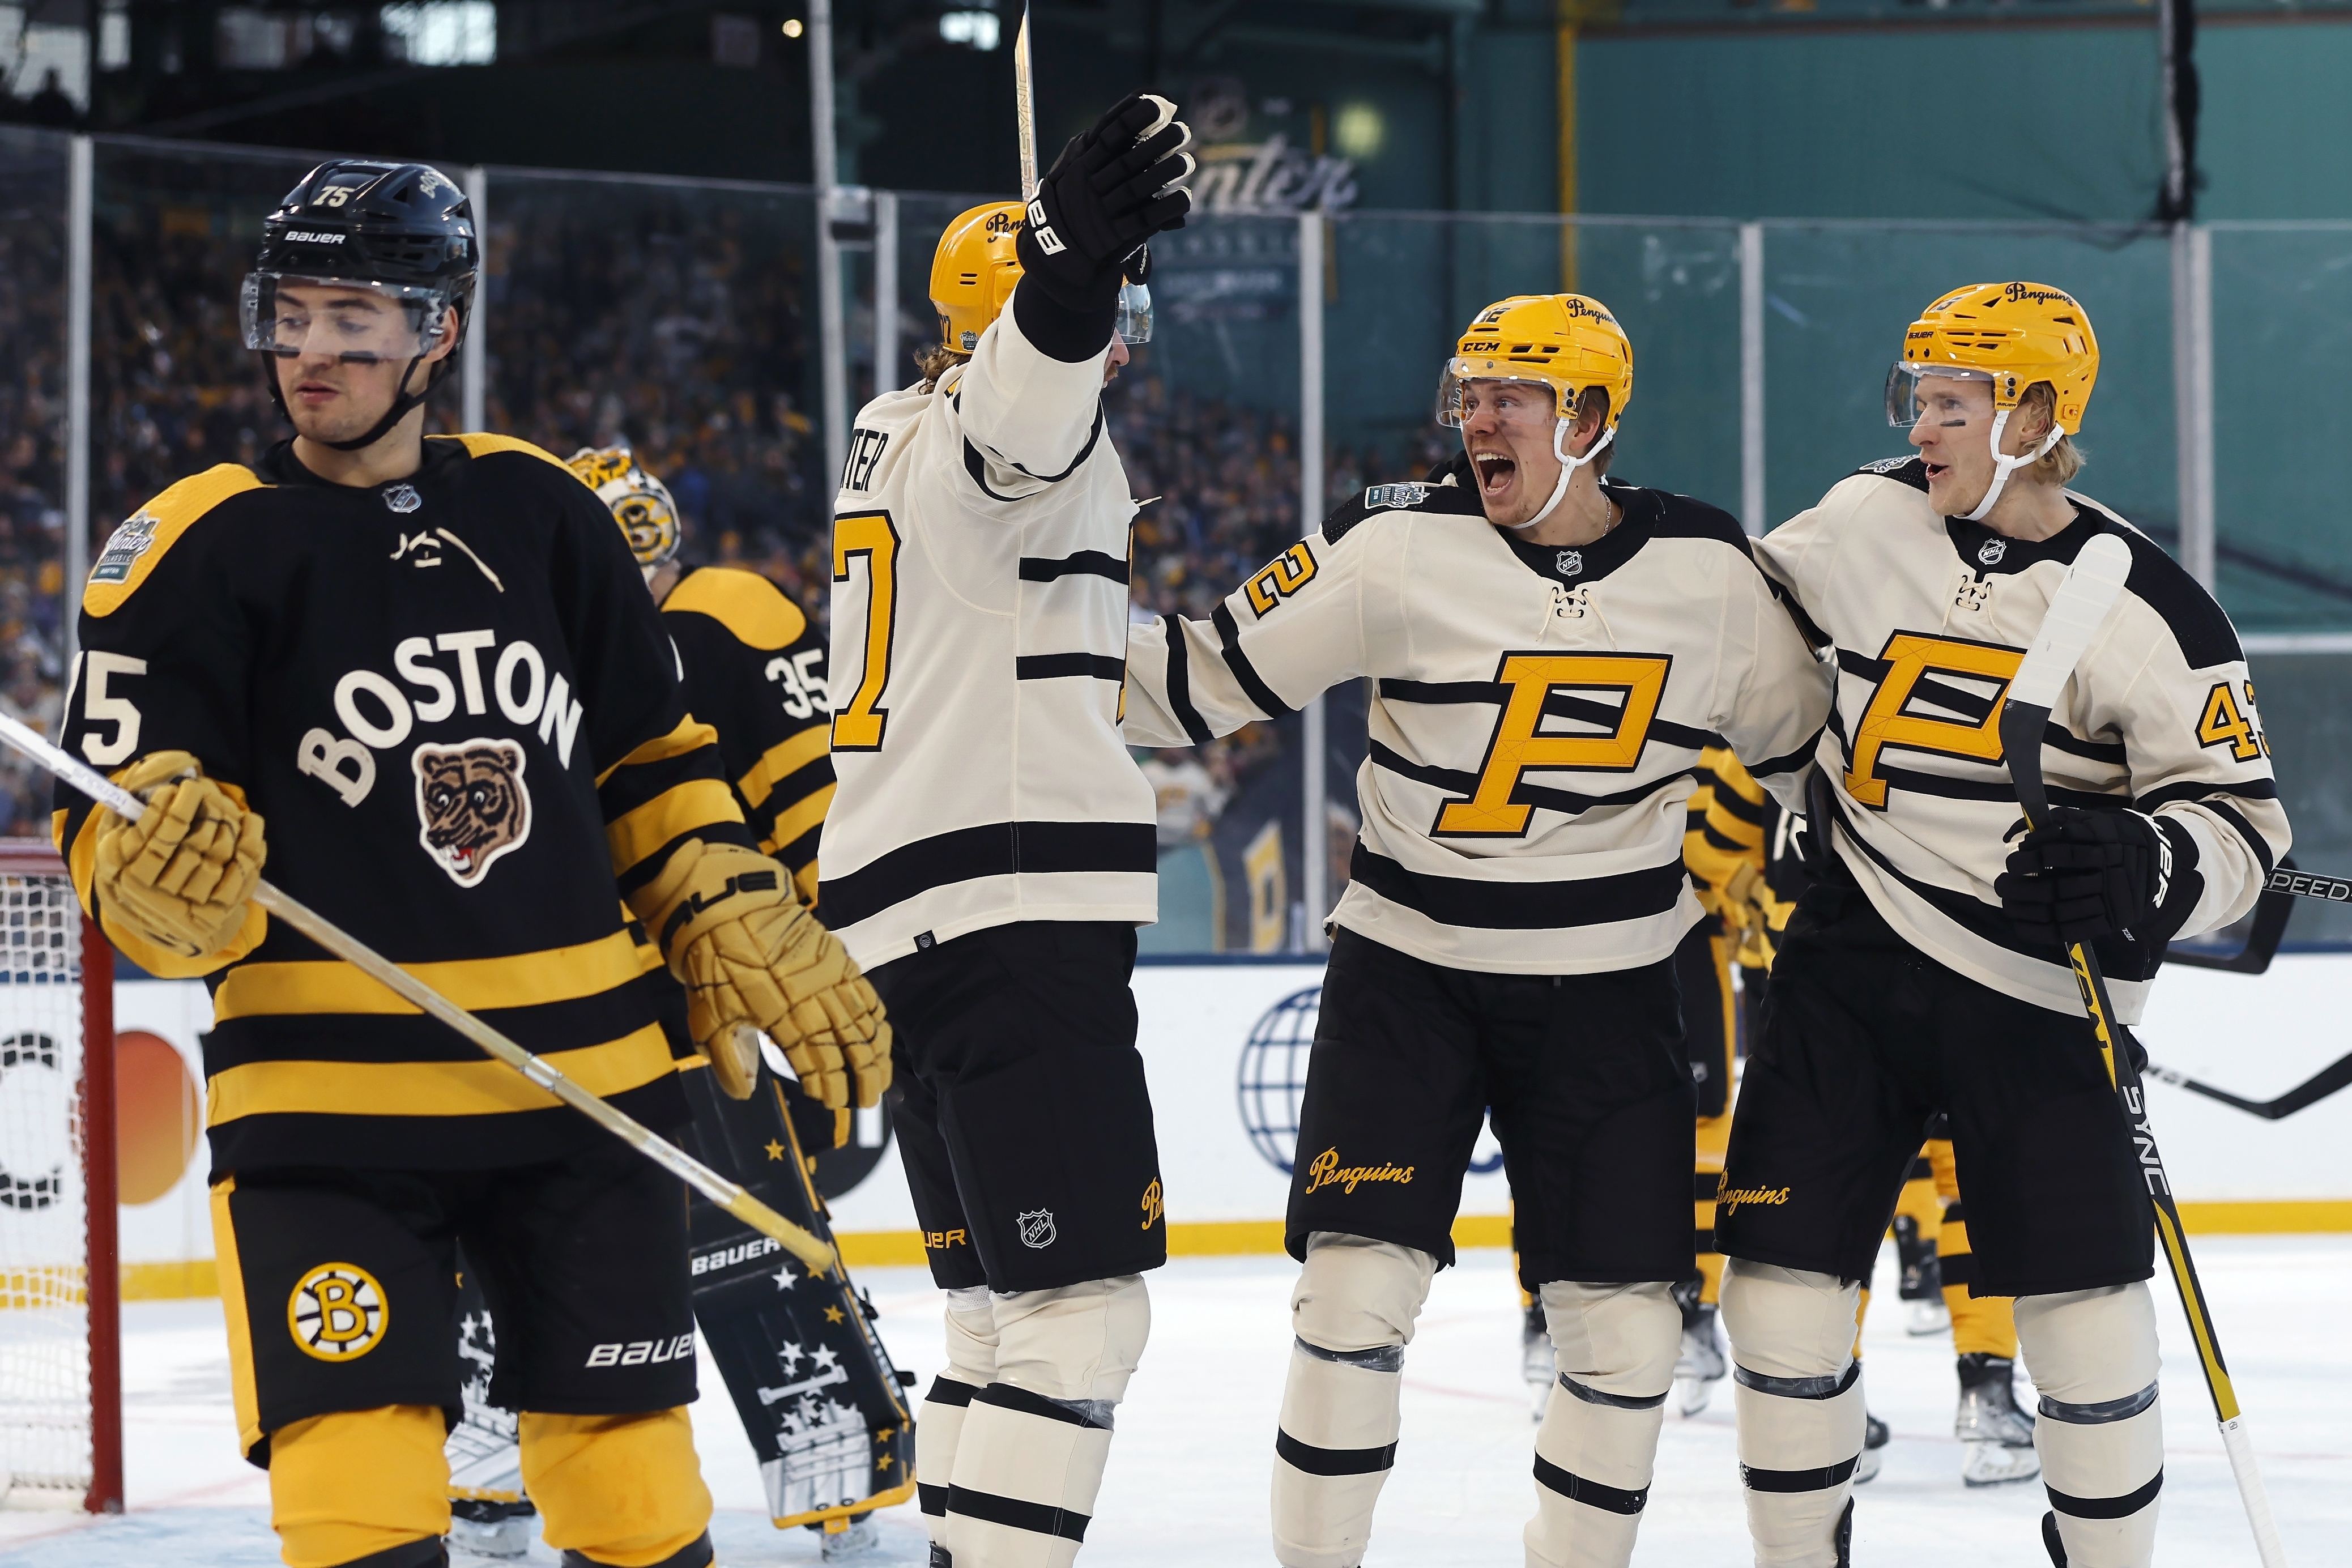 DeBrusk leads Bruins past Penguins in NHL's Winter Classic